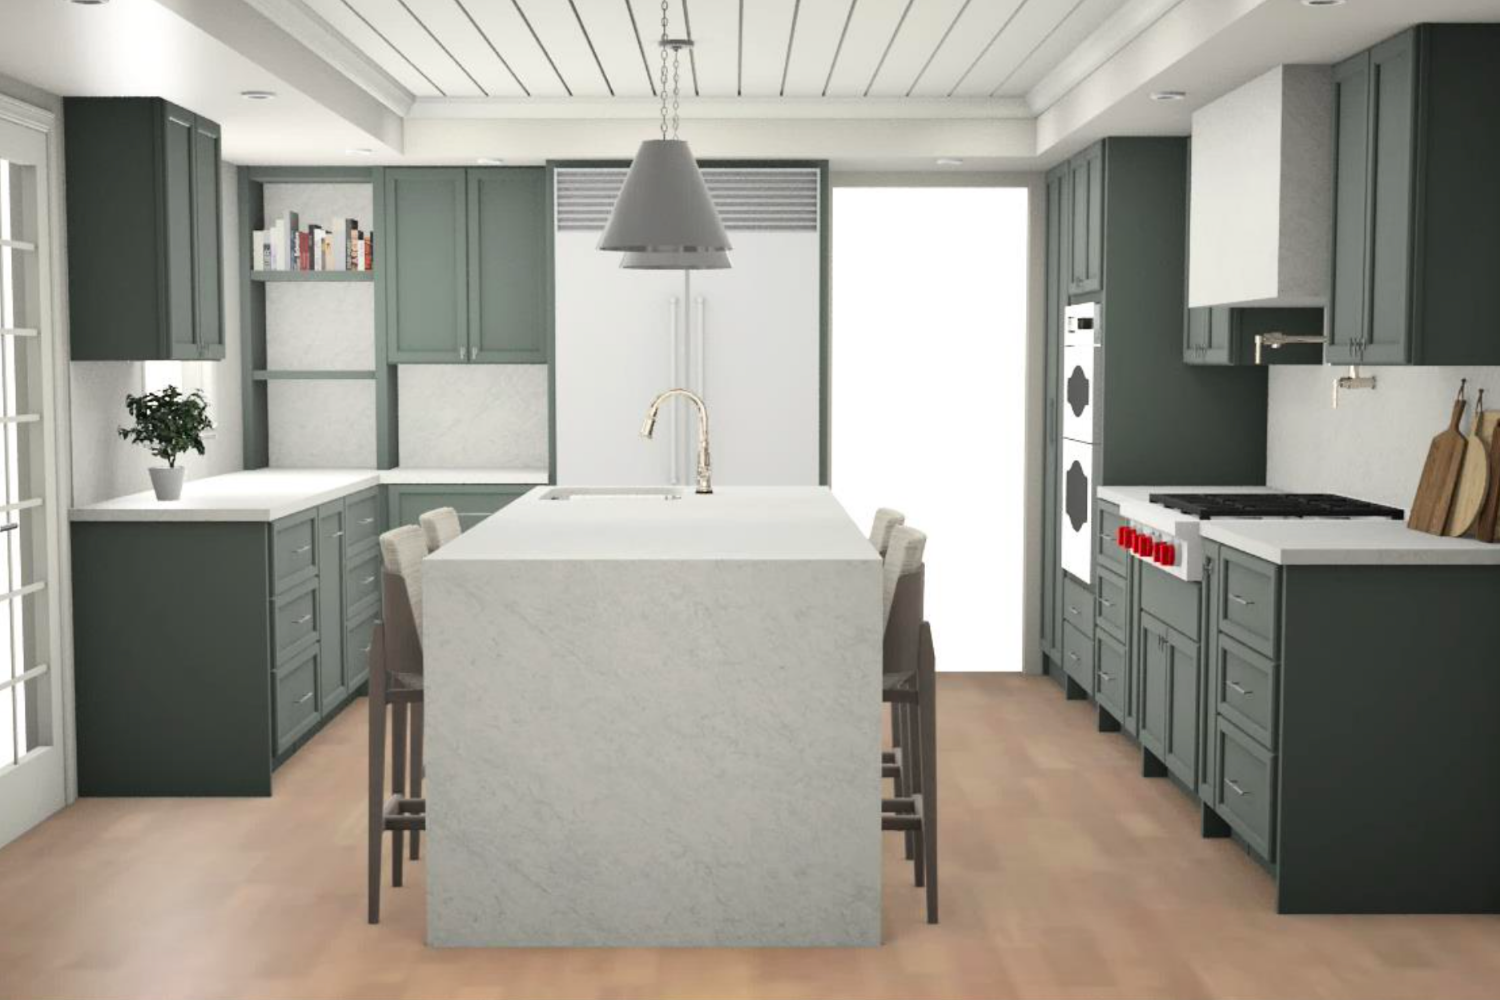 3D kitchen rendering with large island with a waterfall countertop and dark green custom cabinetry